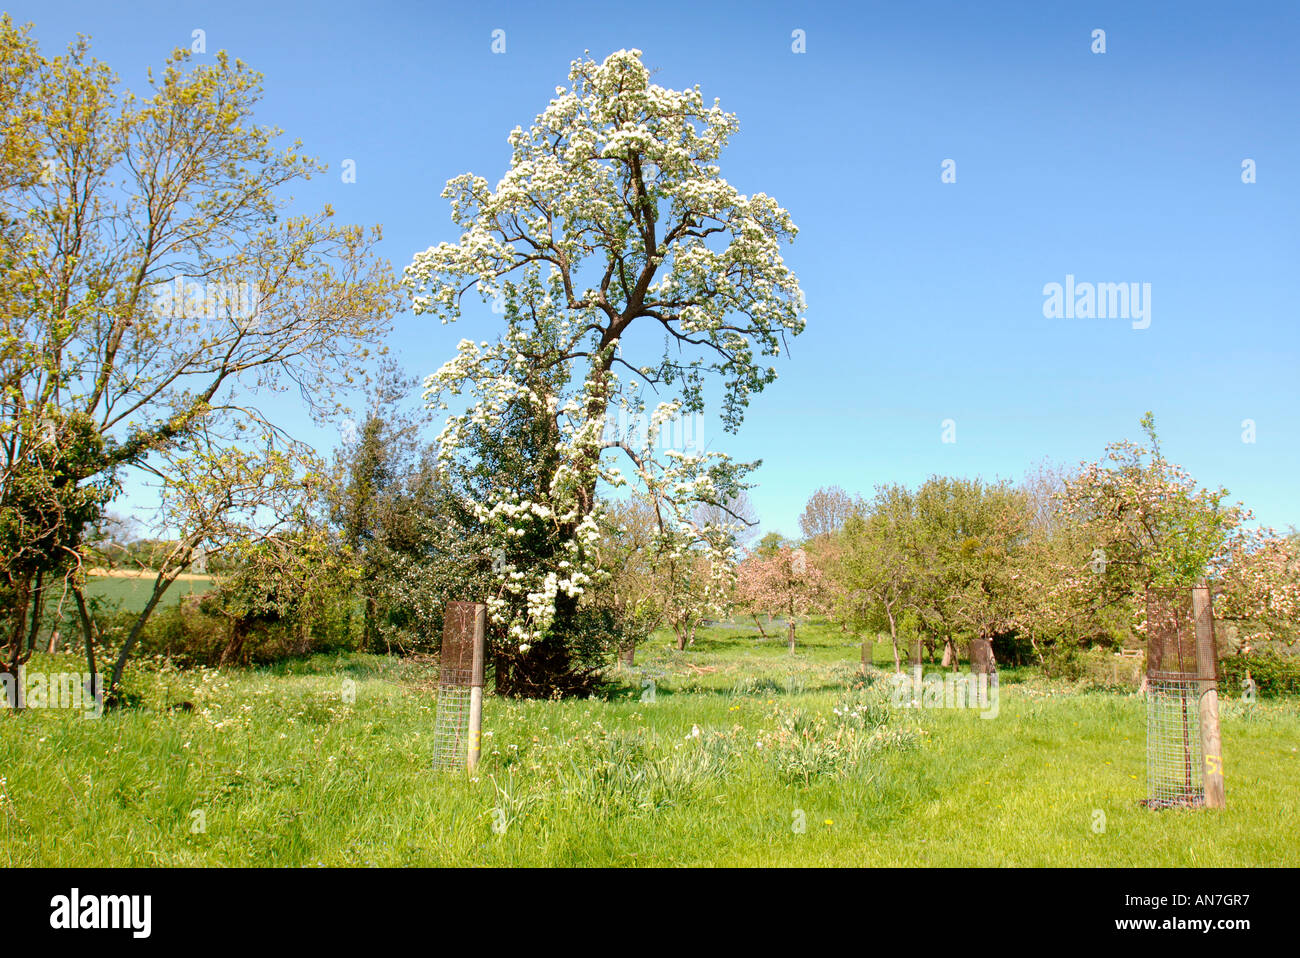 A MATURE BARLAND PERRY PEAR TREE IN FULL BLOSSOM IN A COMMUNITY ORCHARD GLOUCESTERSHIRE ENGLAND UK Stock Photo